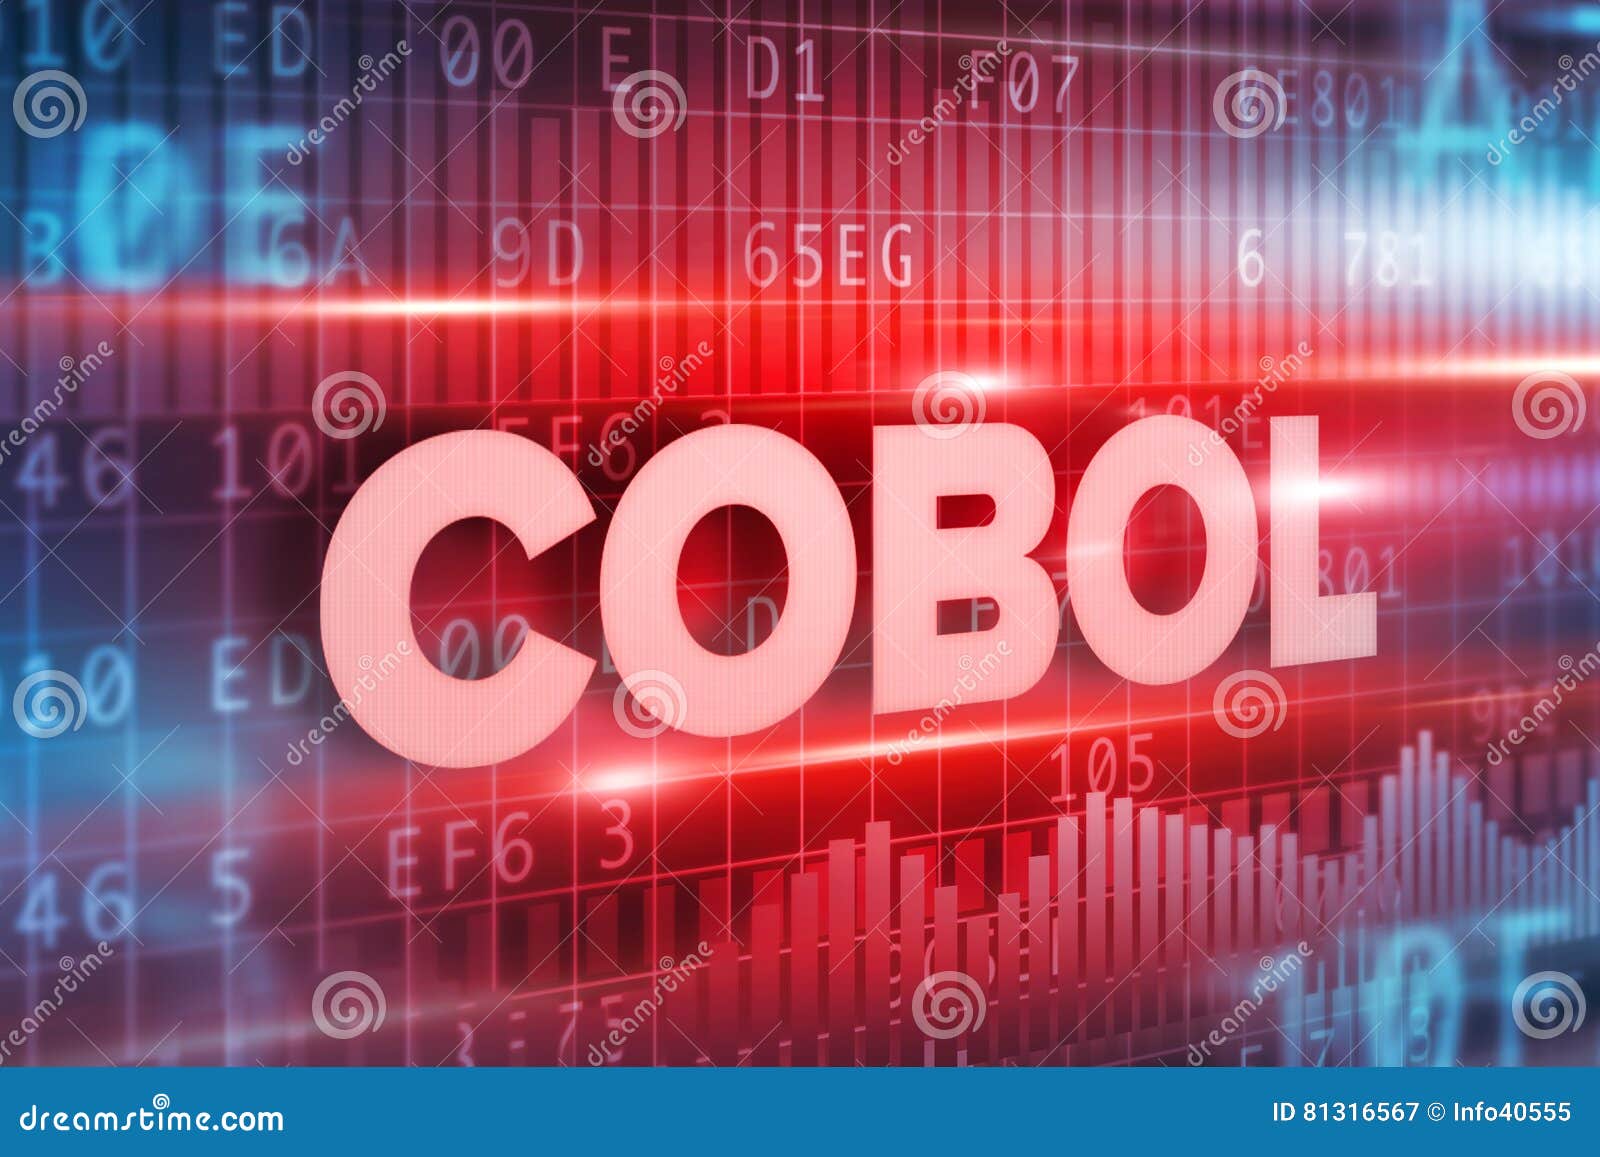 Cobol abstract concept blue text blue background